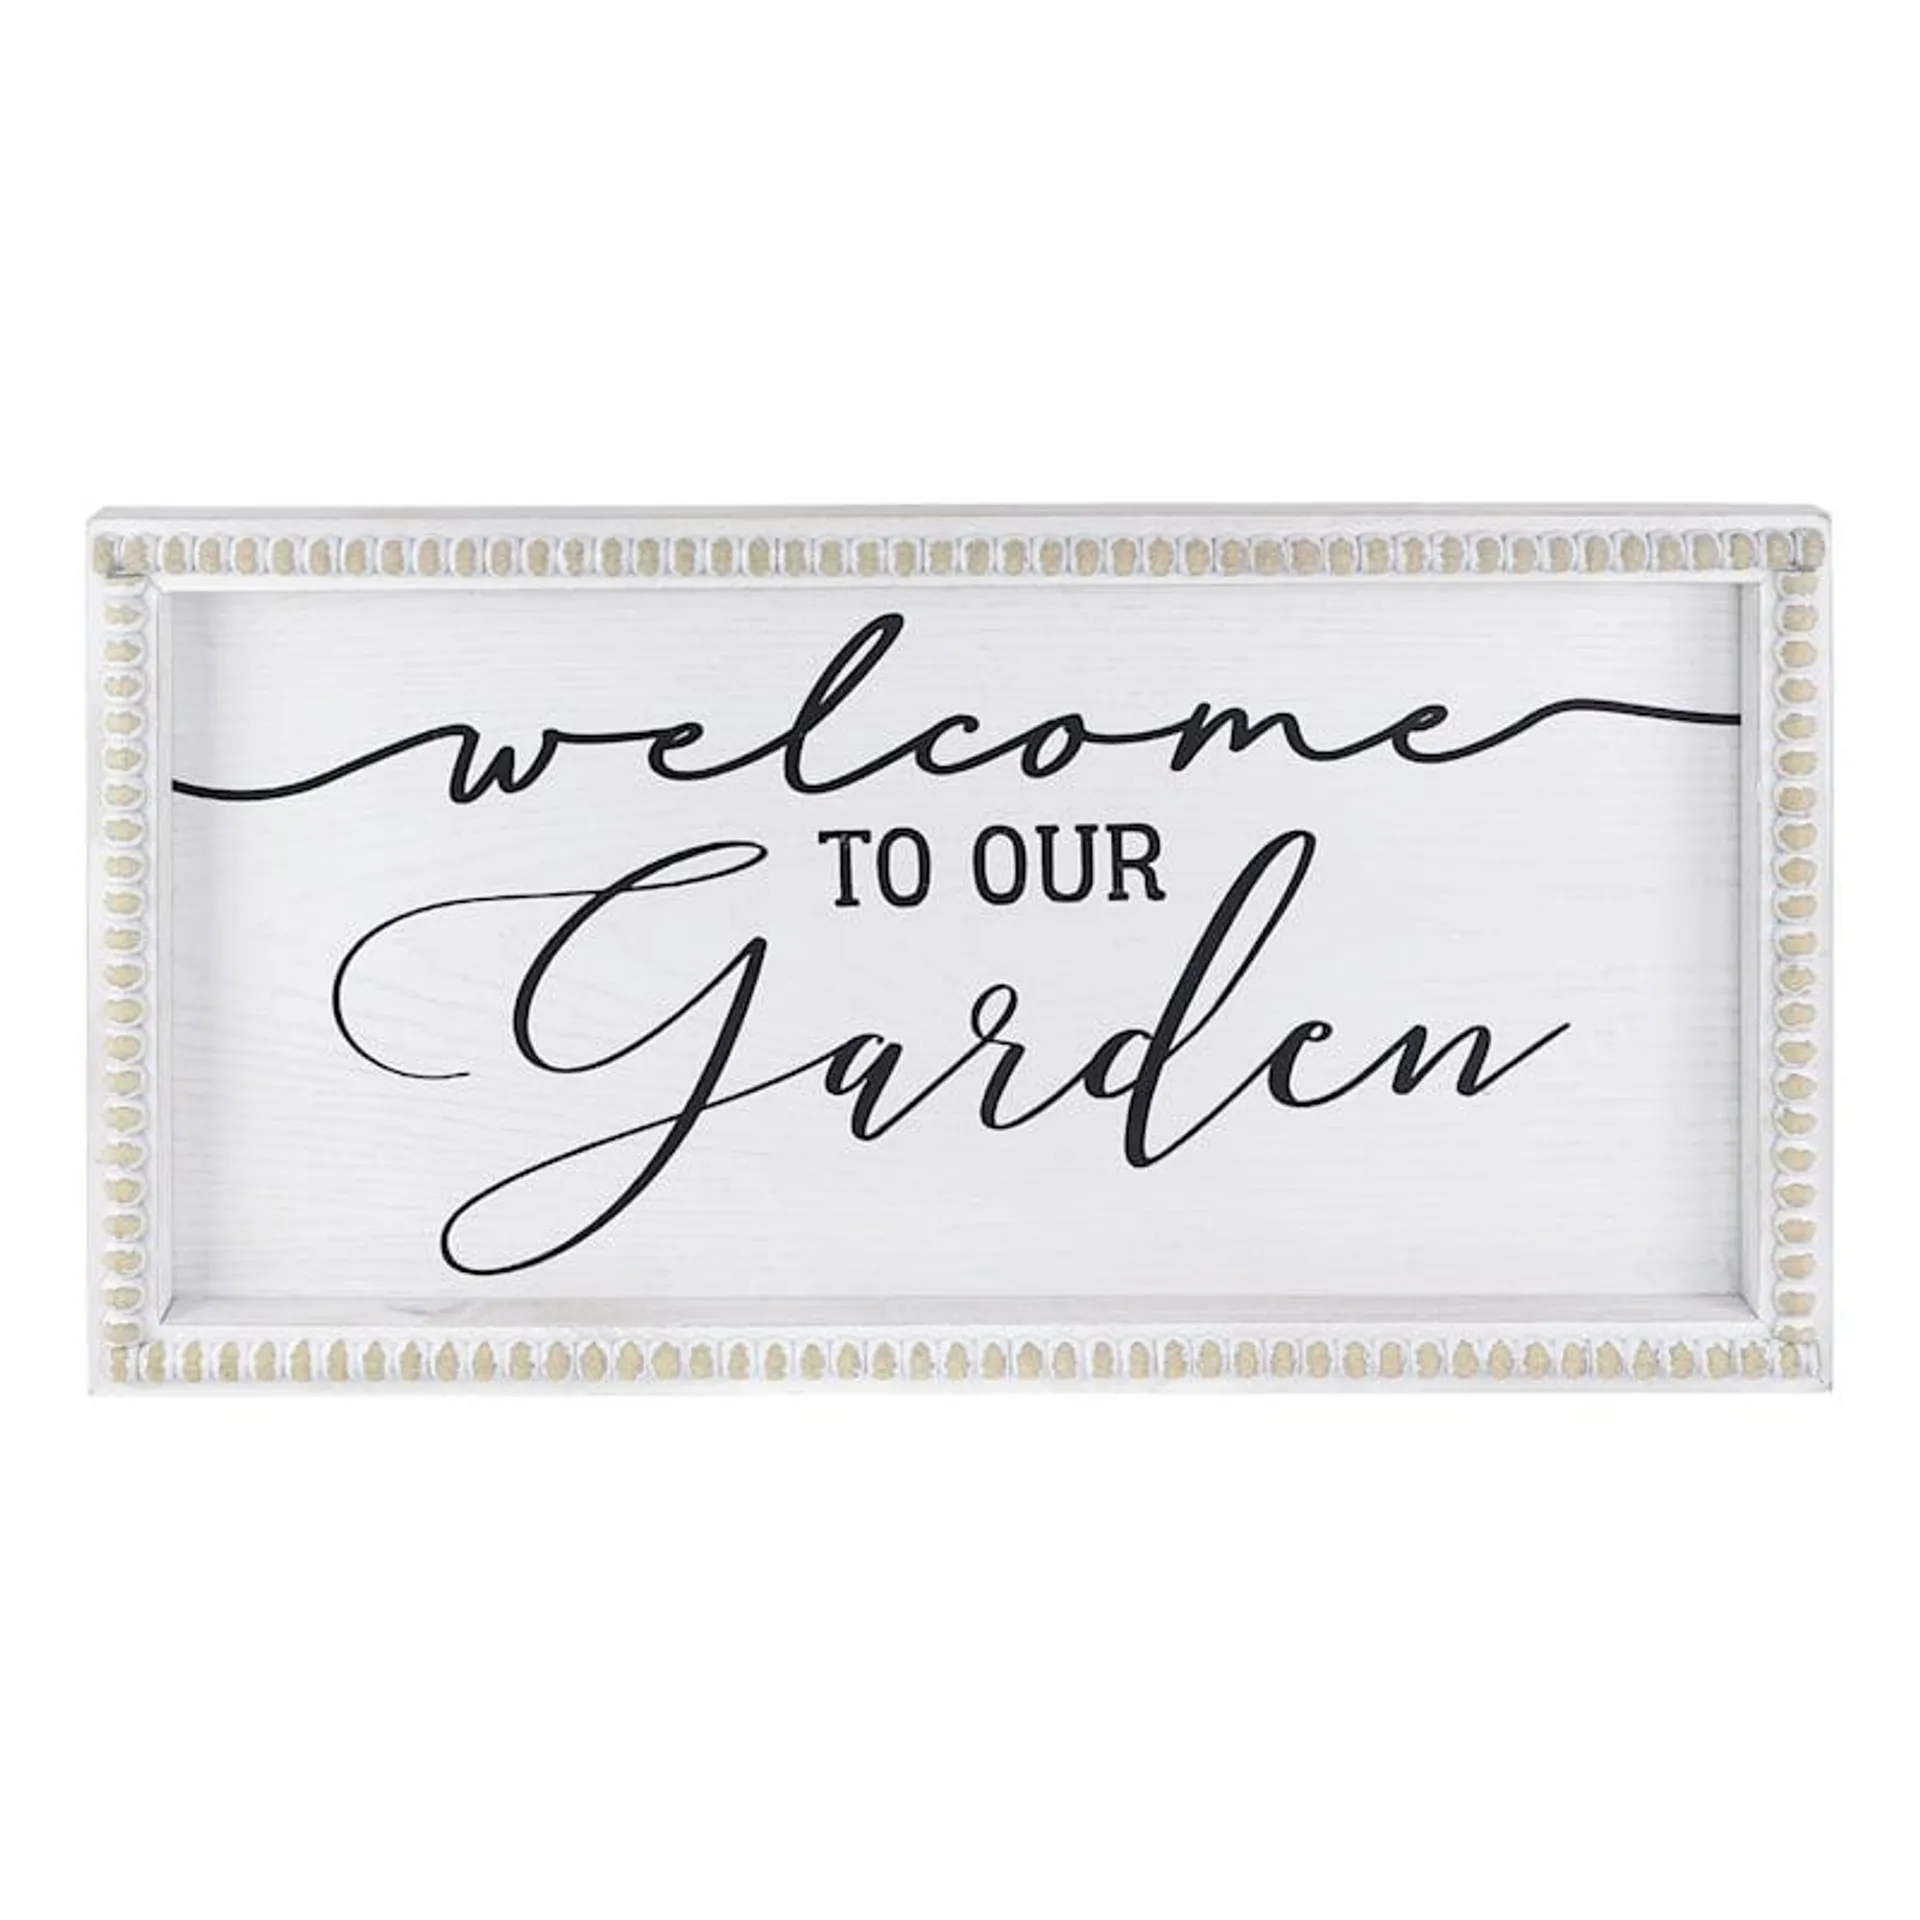 Welcome To Our Garden Wall Sign, 23.5x12